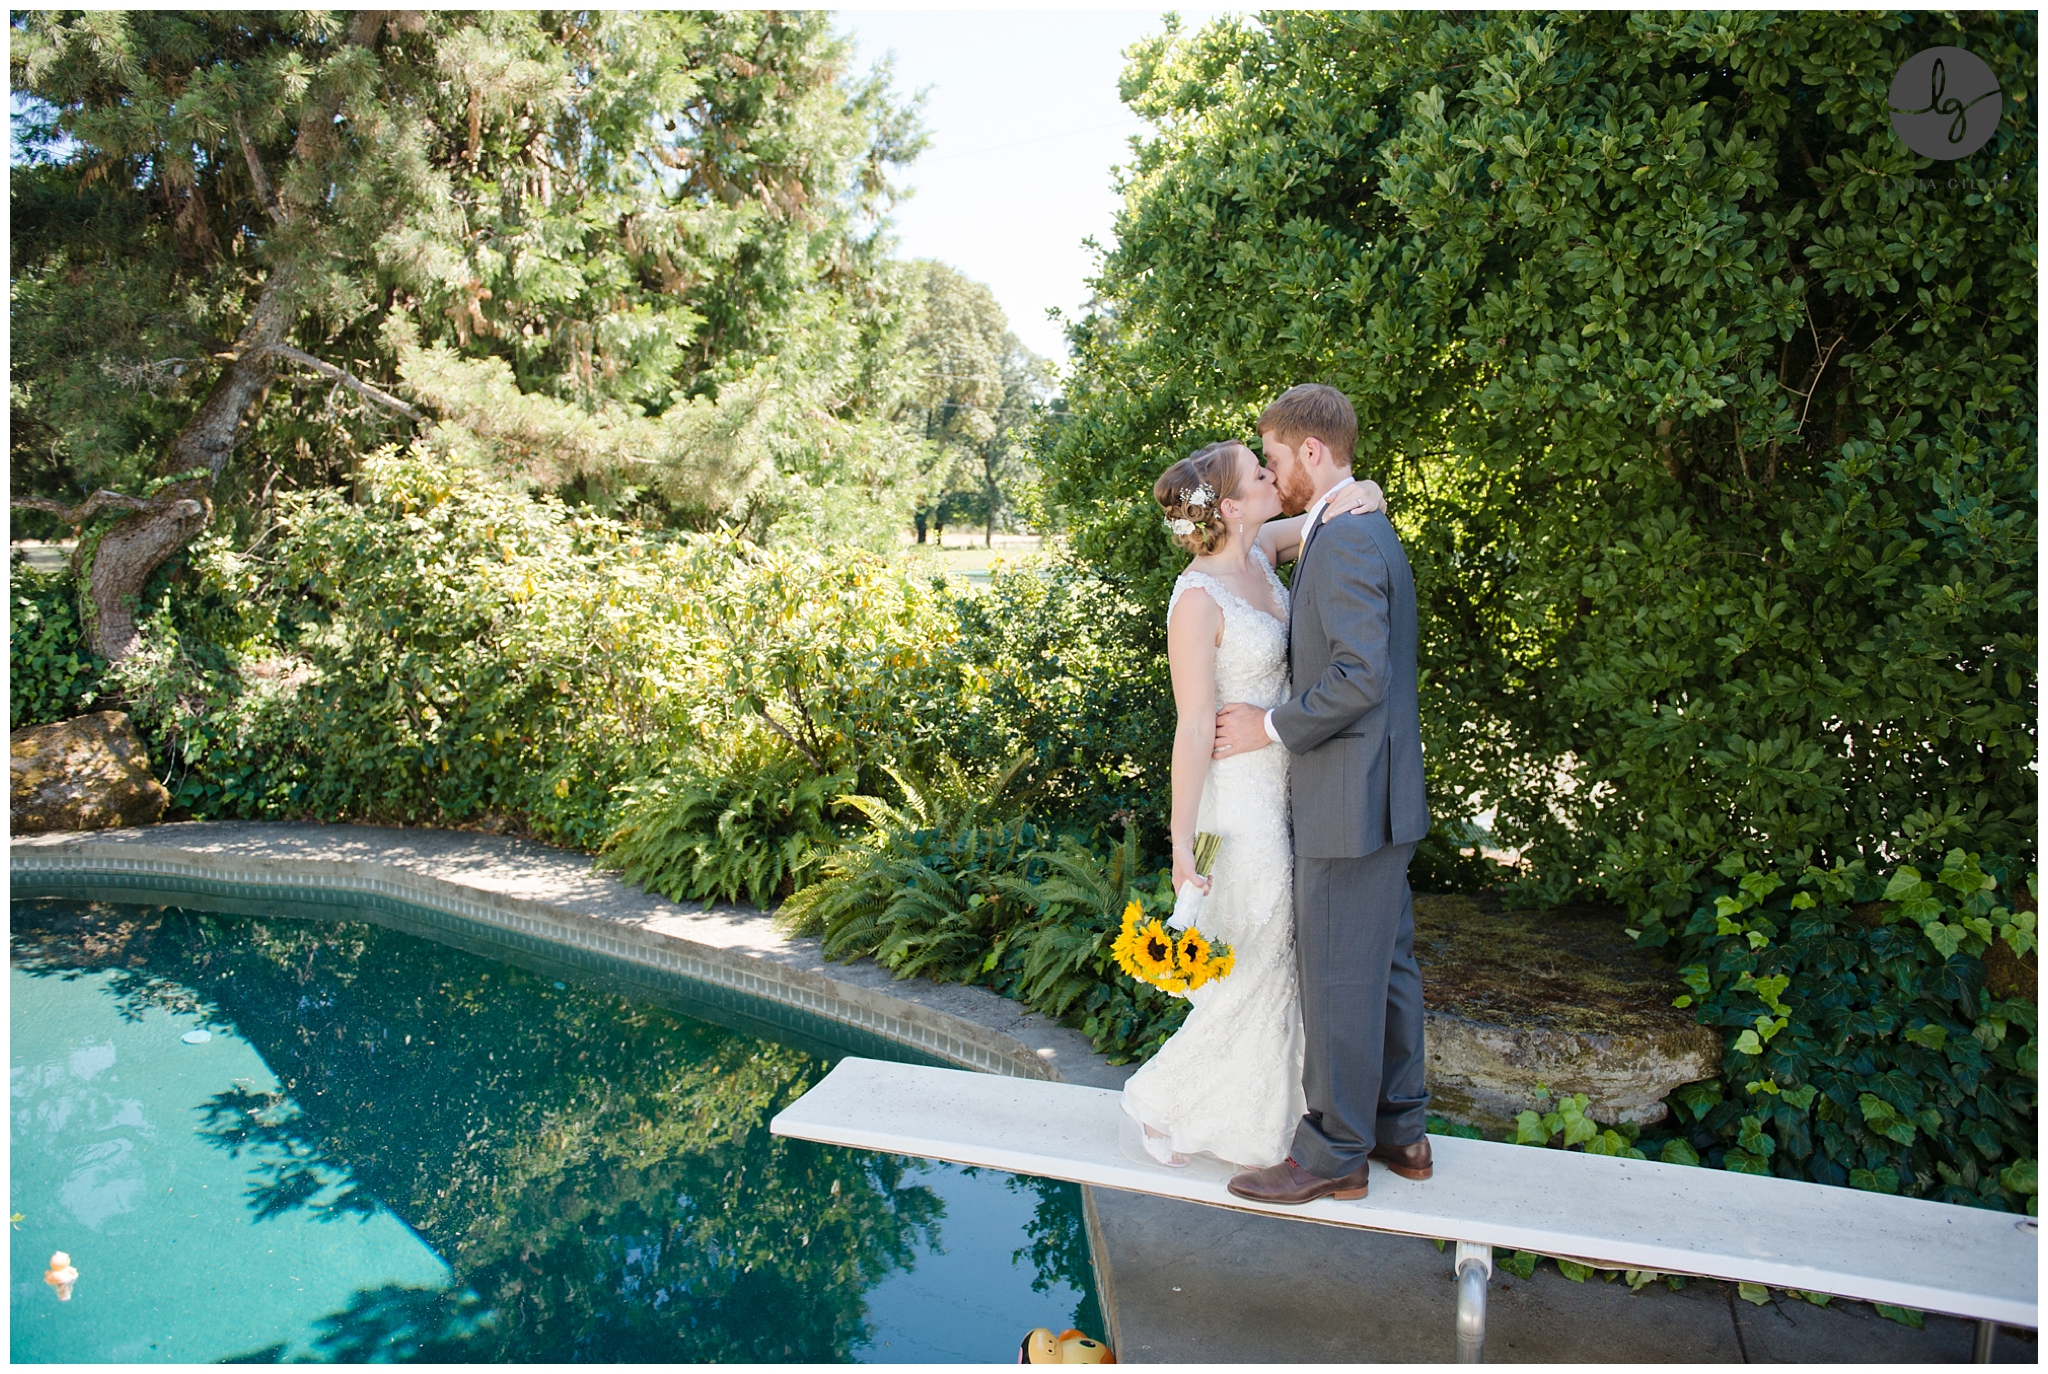 Outdoor wedding picture of bride and groom by the pool | Lydia Gillis Photography 